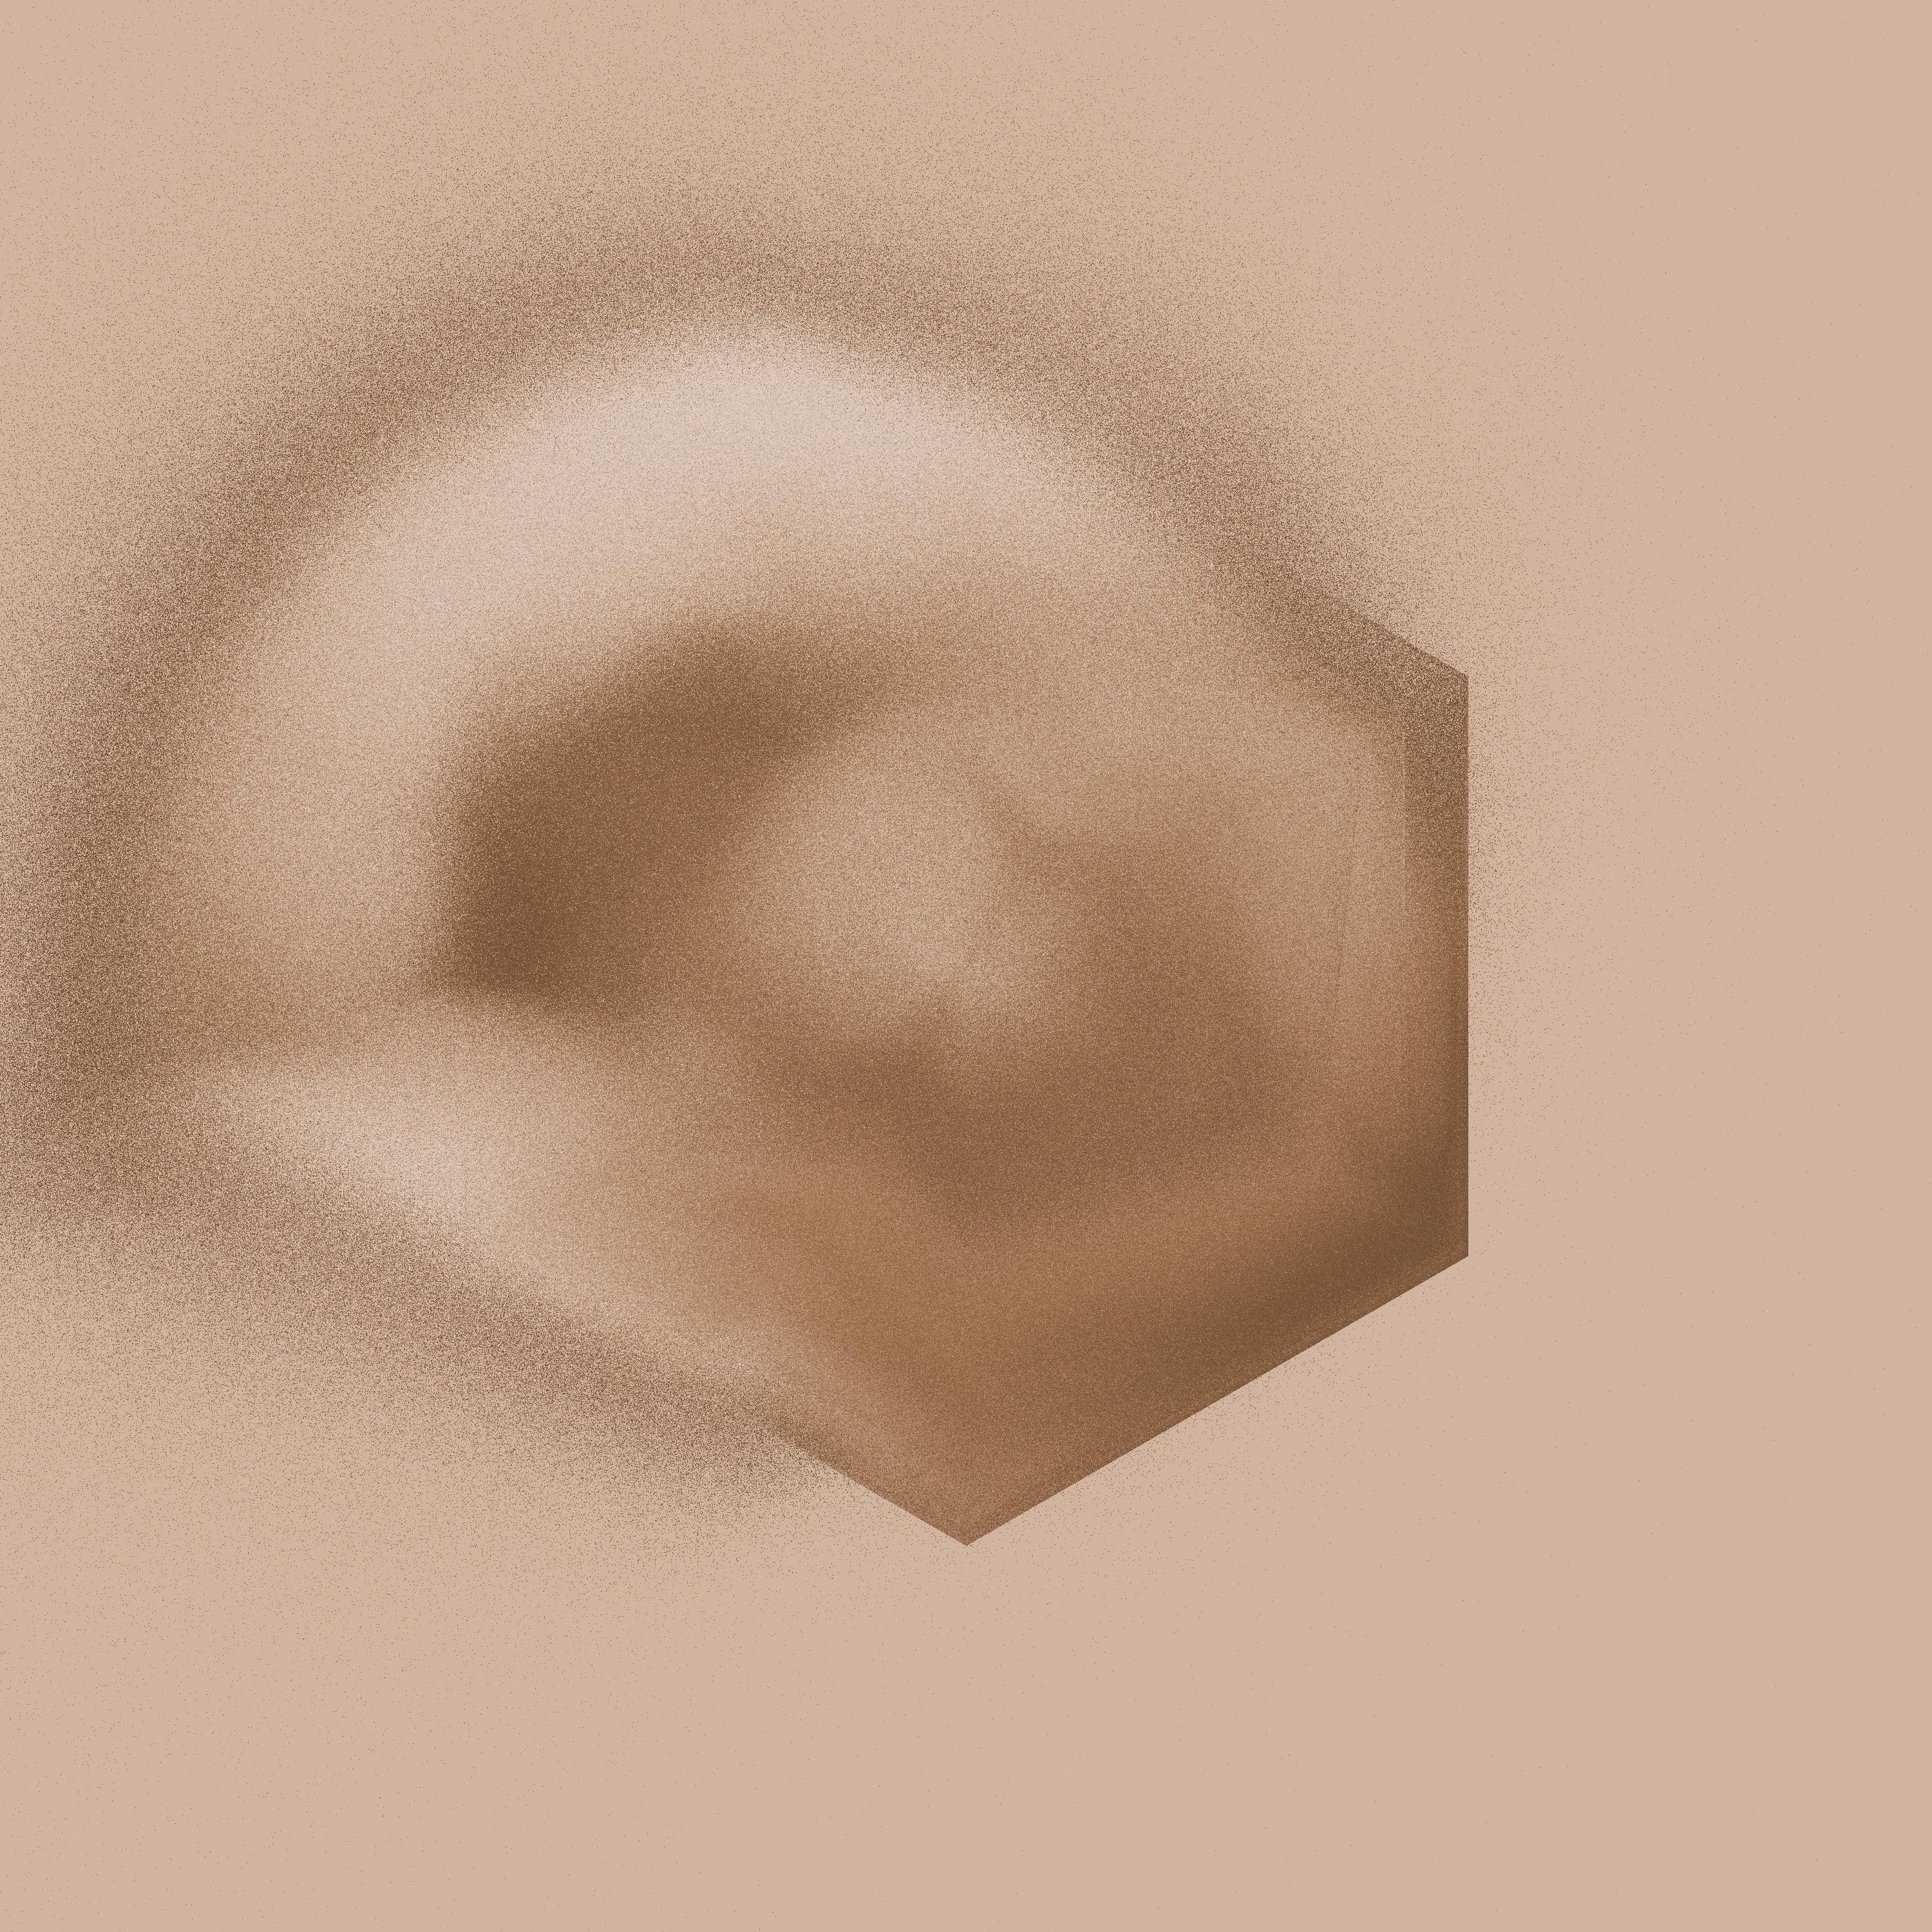 swirling brown monochrome image dominated by textured grainy hexagon that appears to be dissolving into pure noise on the left hand side